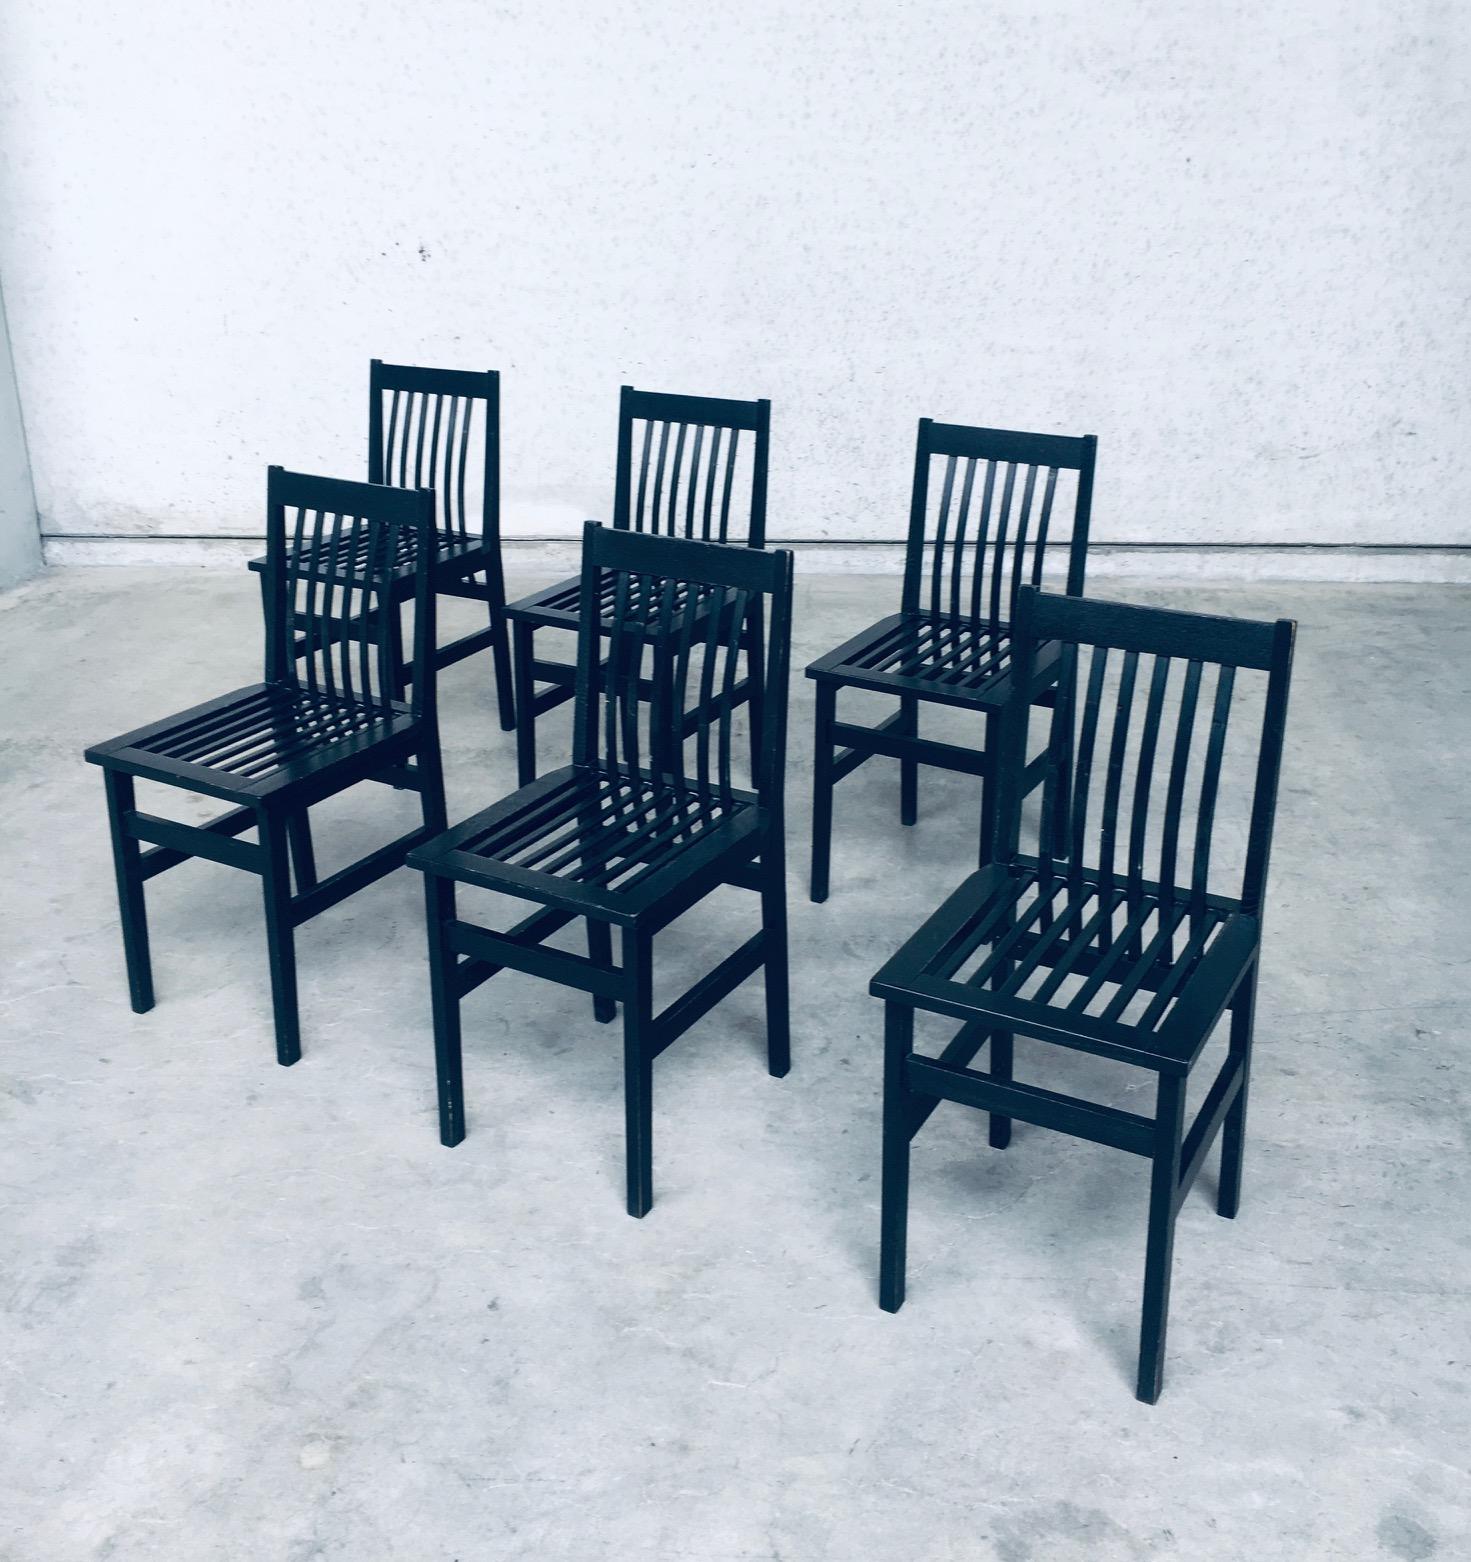 Vintage 'MILANO' dining chair set of 6 by Aldo Rossi for Molteni, made in Italy 1987. These chairs are also in the Molteni Museum. Black stained wood constructed chairs. Lightweight and very sturdy design. All 6 are in good condition. All original.